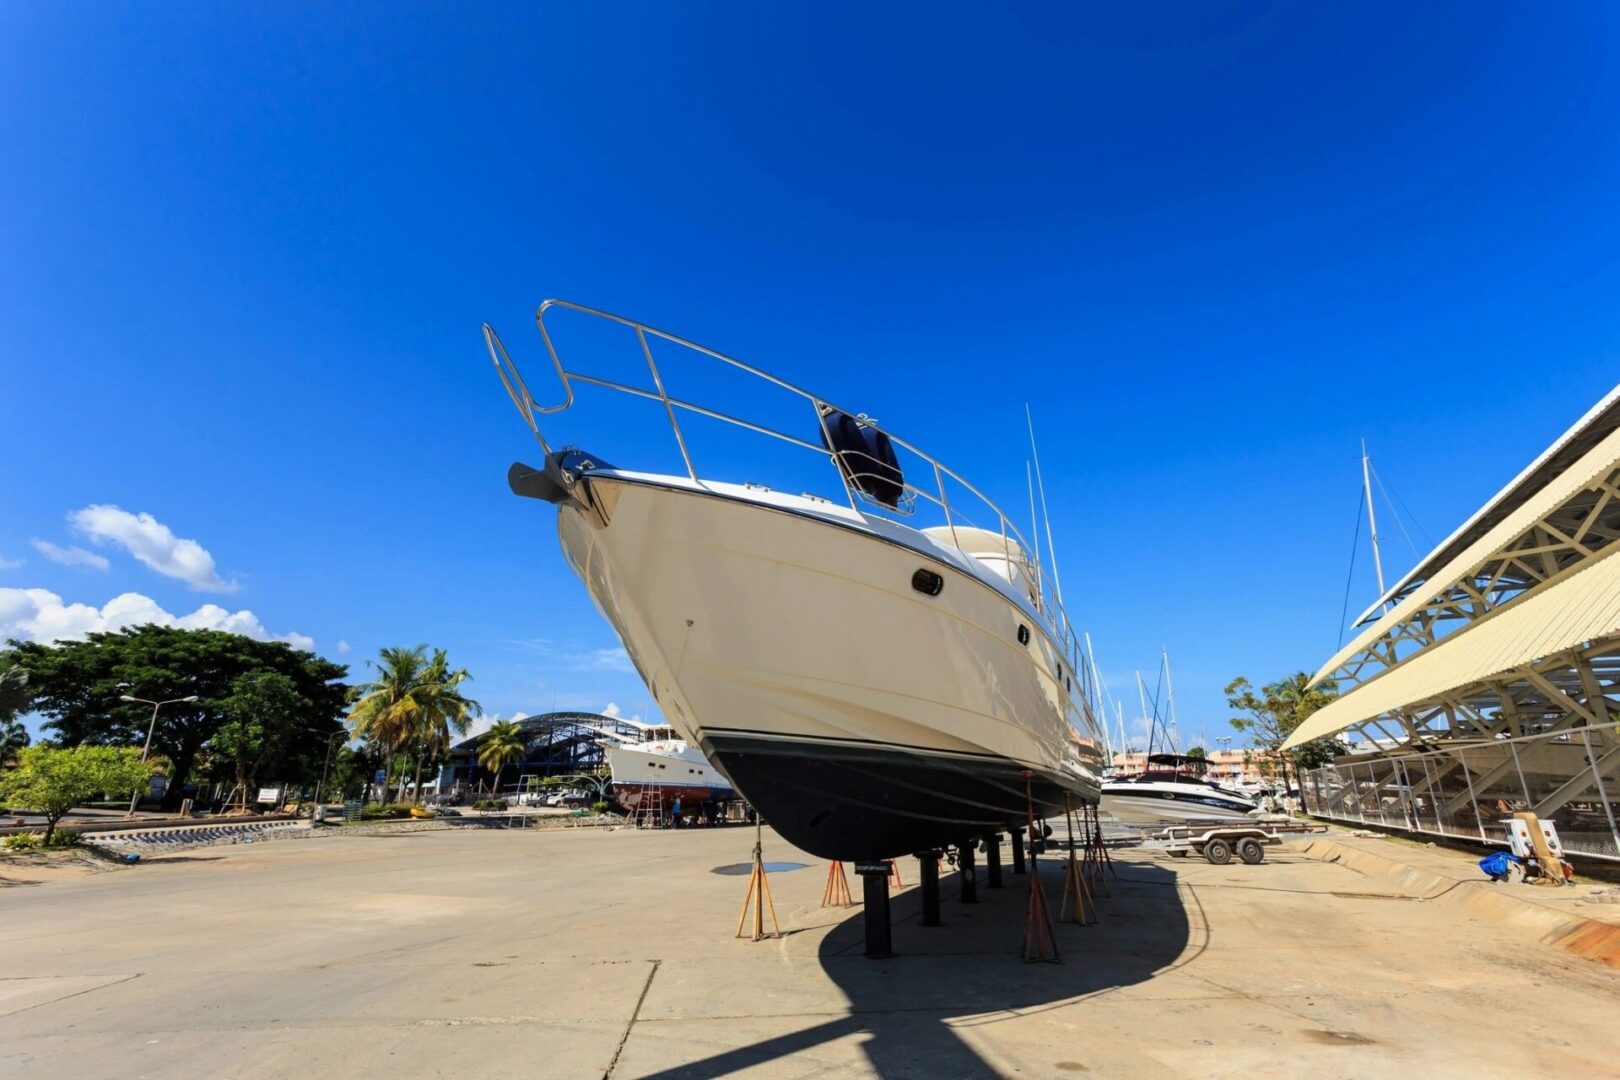 A boat is parked on the dock in a marina.